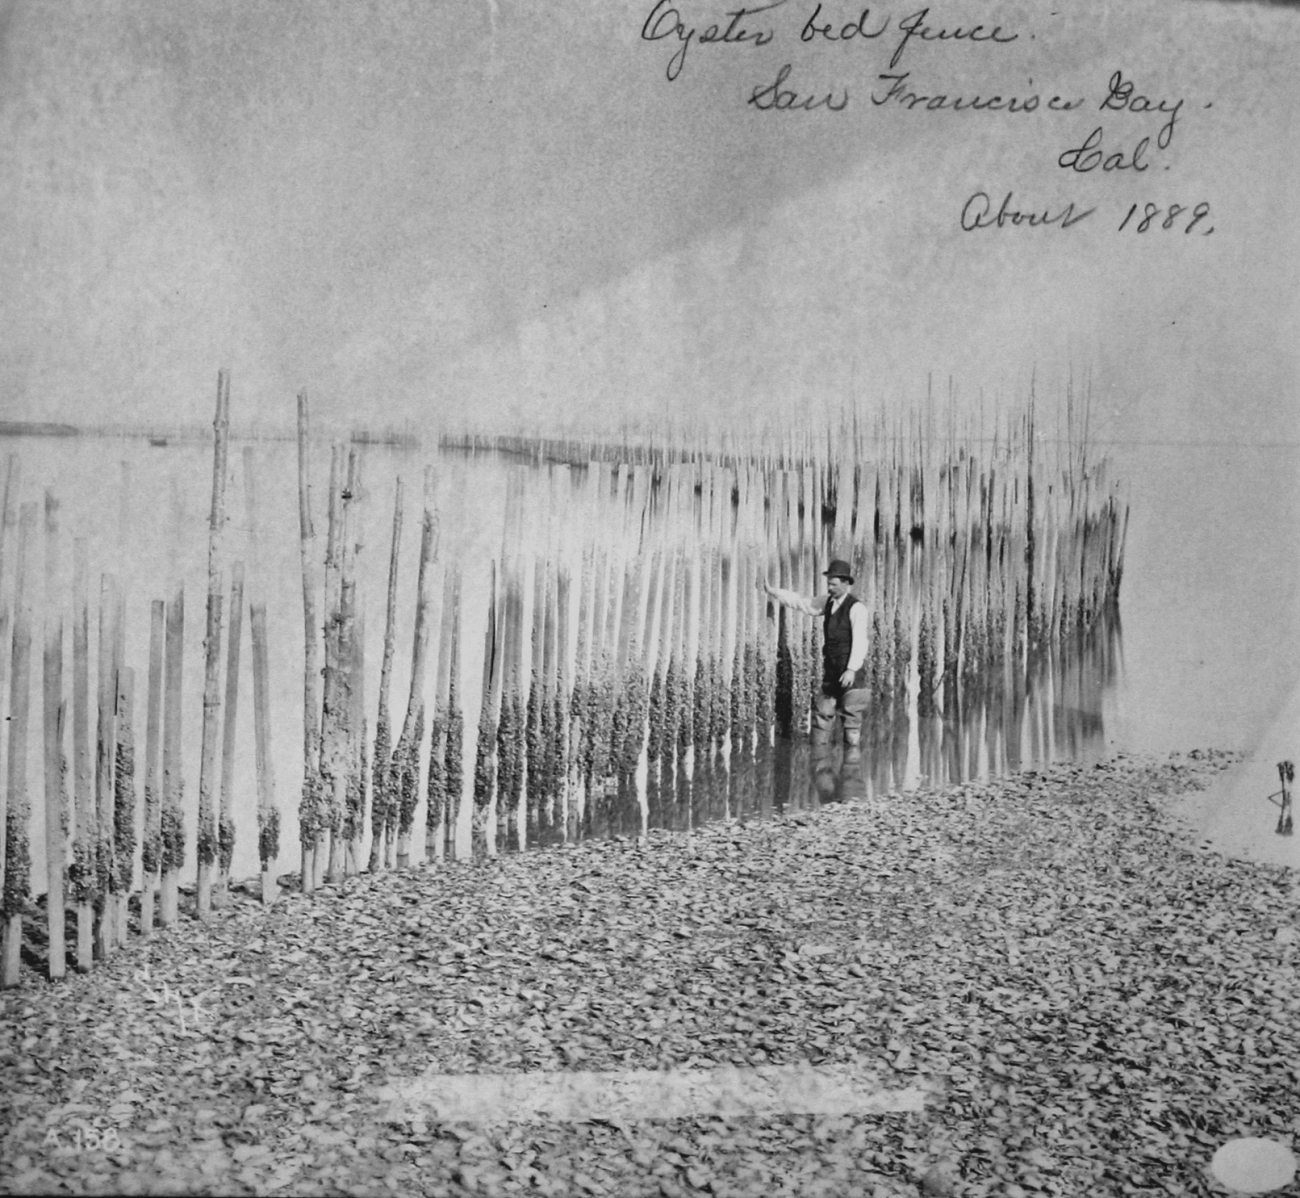 Oyster bed fence, San Francisco Bay, CA, about 1889